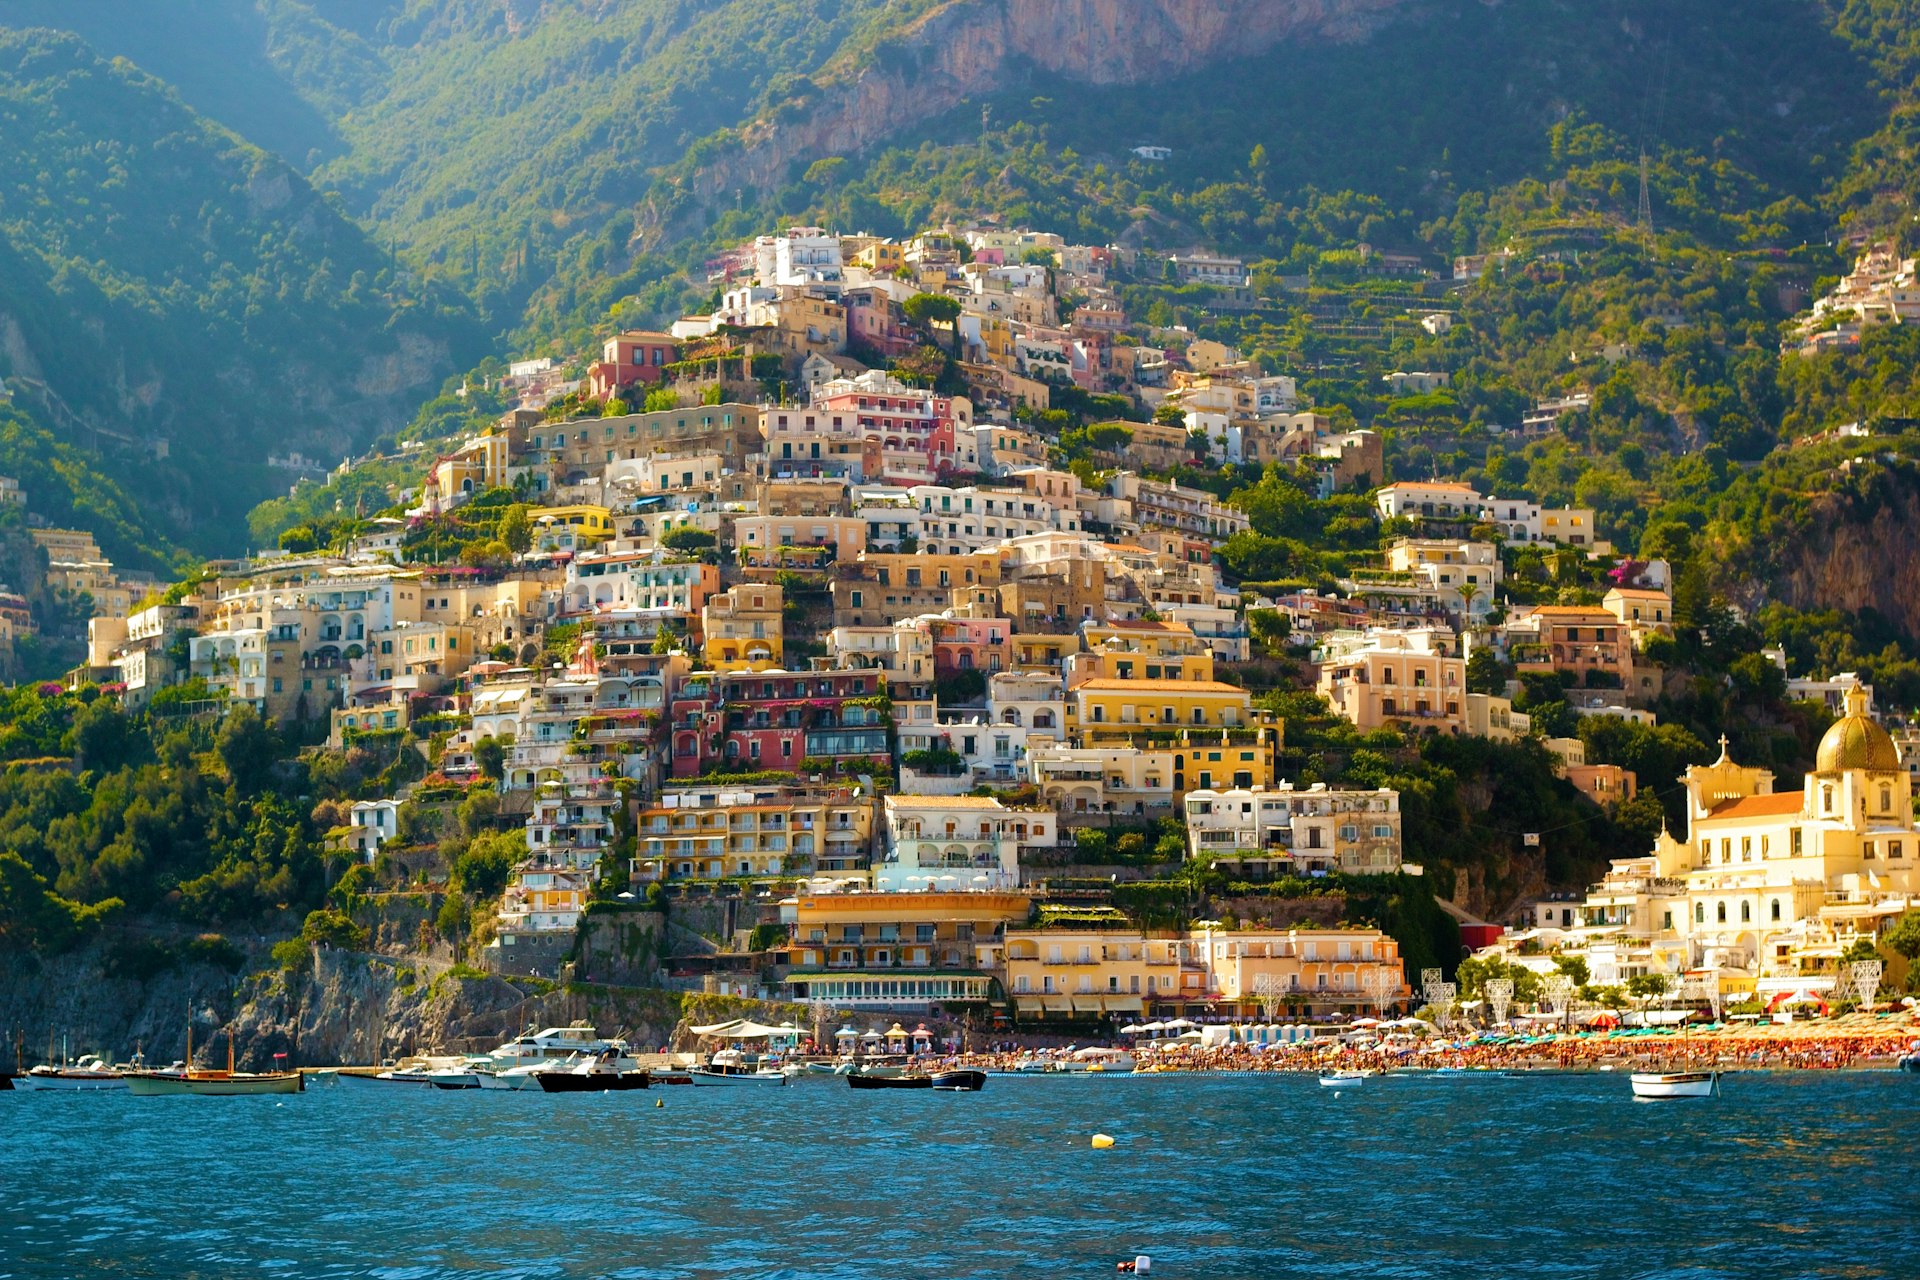 Colourful houses cover a steep coastal hillside, making up part of the town of Positano on the Amalfi Coast, Italy. The photo is taken from the sea and boats are docked in the water near the shore.